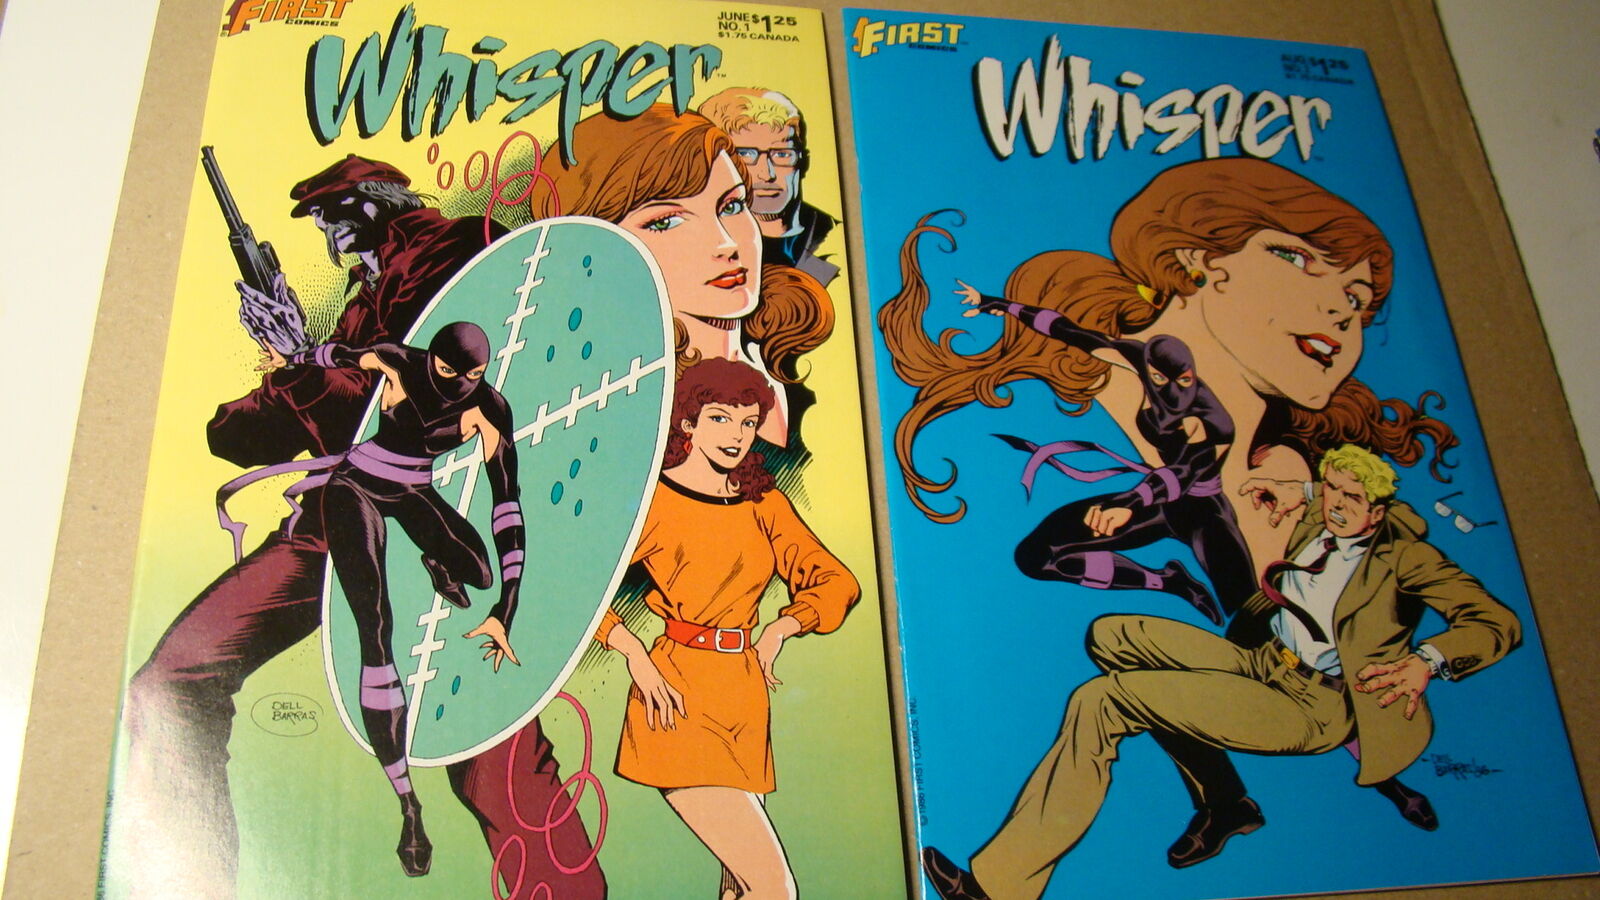 WHISPER 1 & 2 LOT *NM- 9.2 OR BETTER* FIRST COMICS